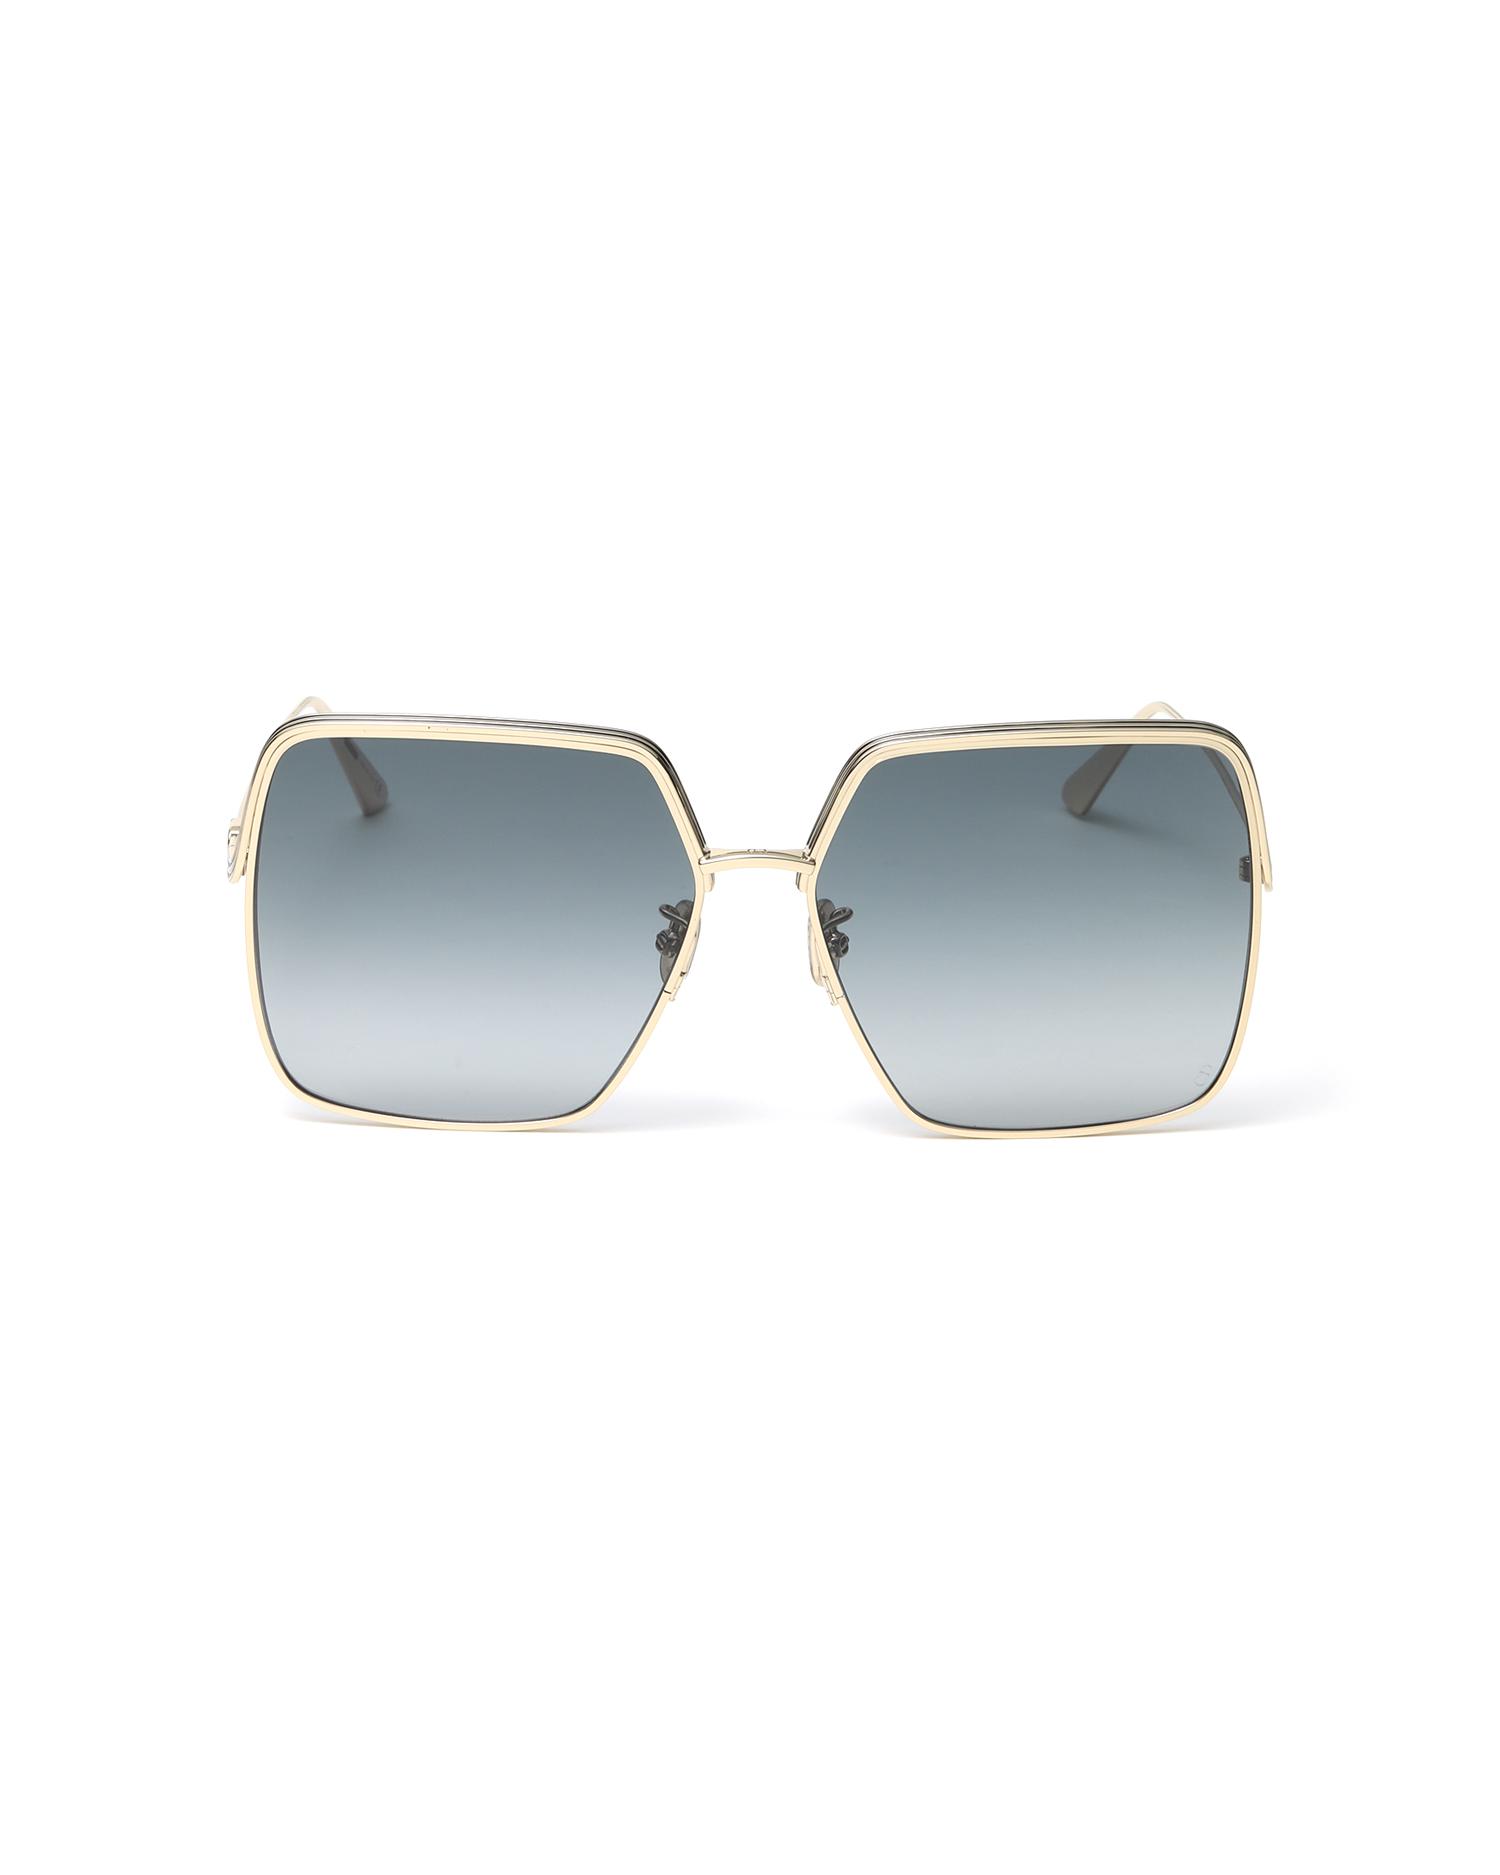 Shaded square Sunglasses by CHRISTIAN DIOR